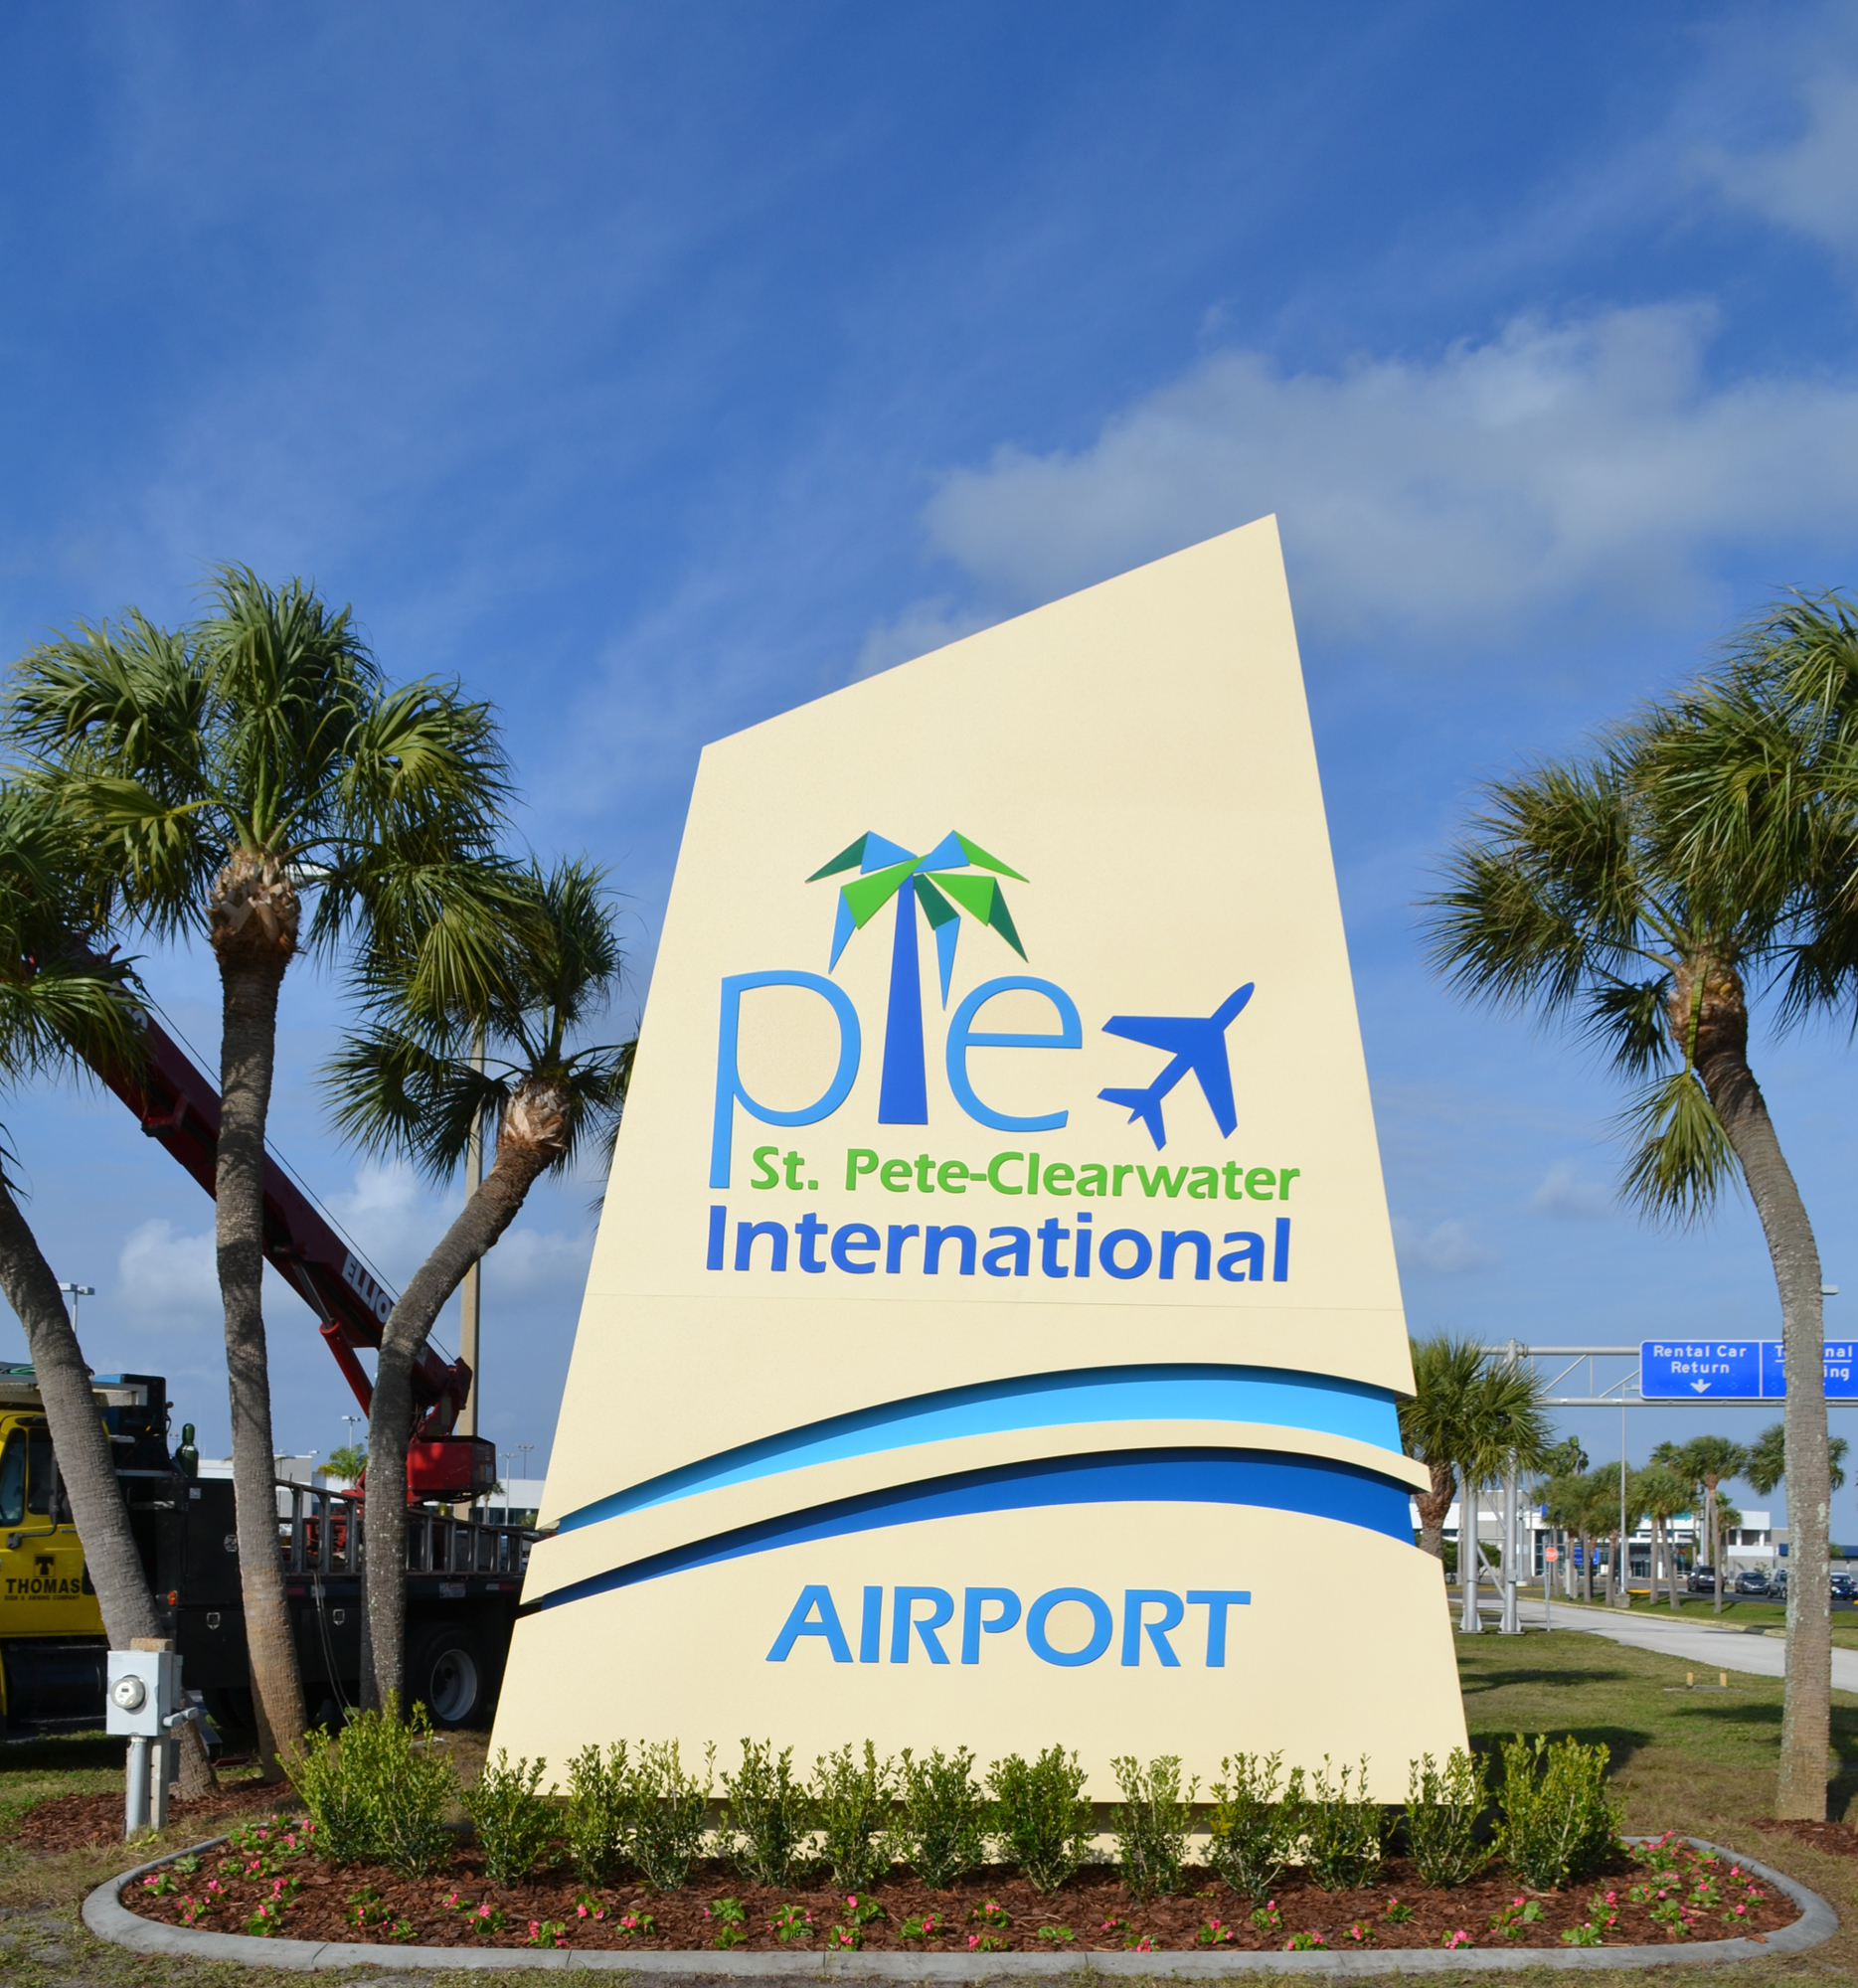 Courtesy. St. Pete-Clearwater International Airport enjoyed a 12.1% increase in passenger traffic over the Labor Day weekend, compared to the same period last year.